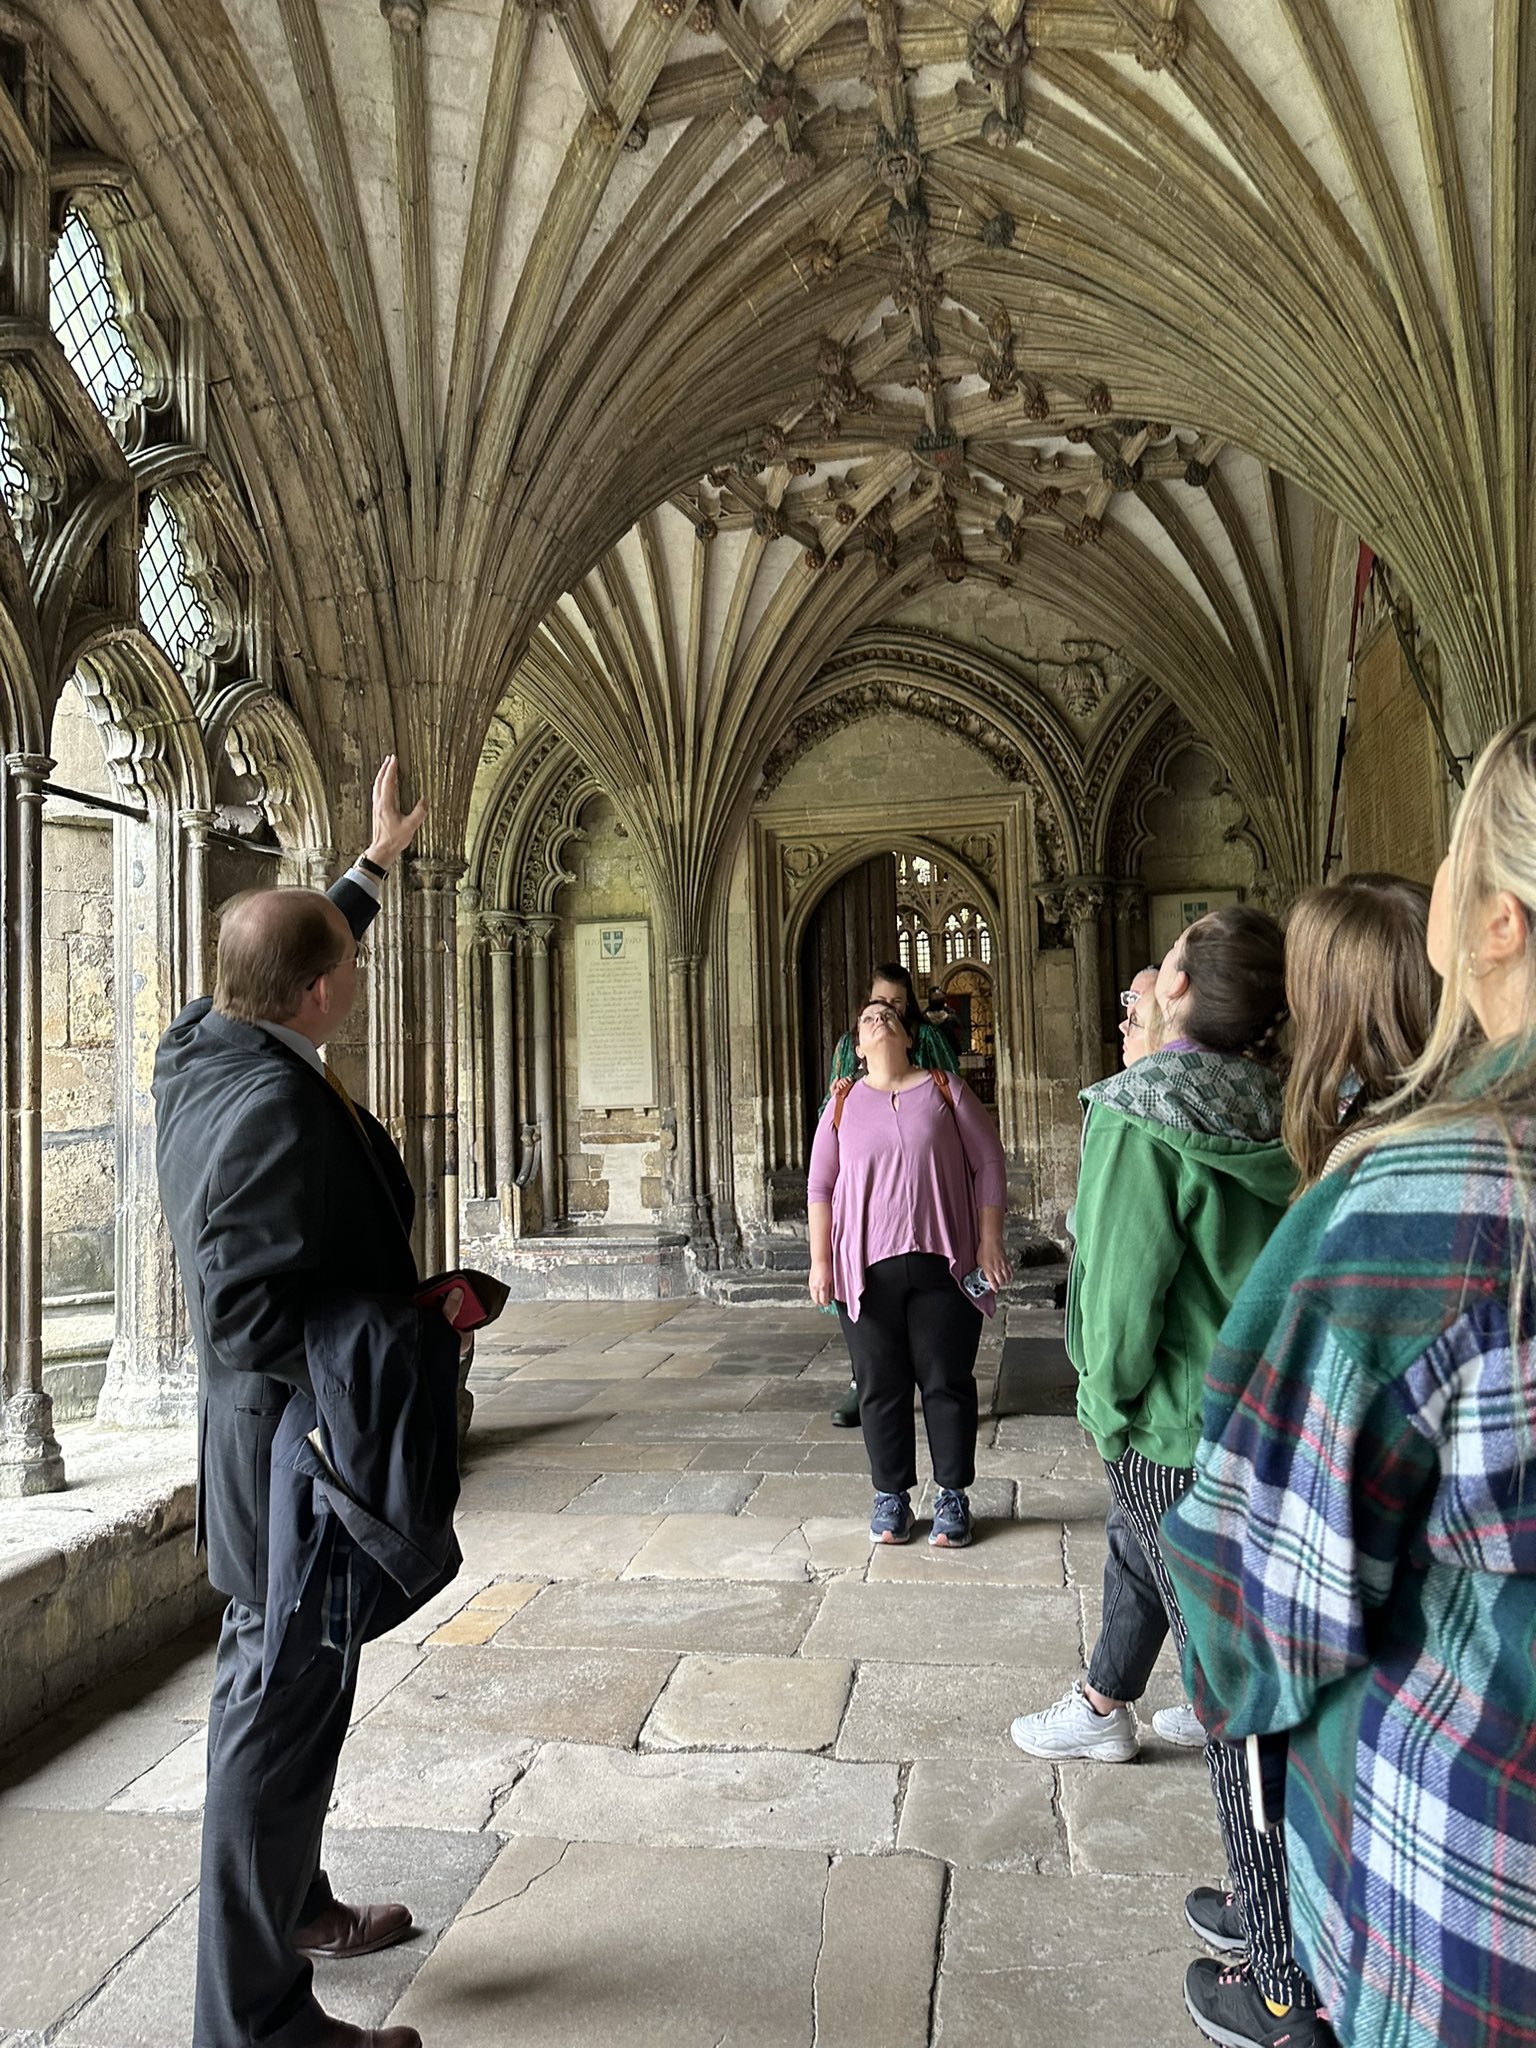 Some of the new cohort in Canterbury Cathedral Cloisters